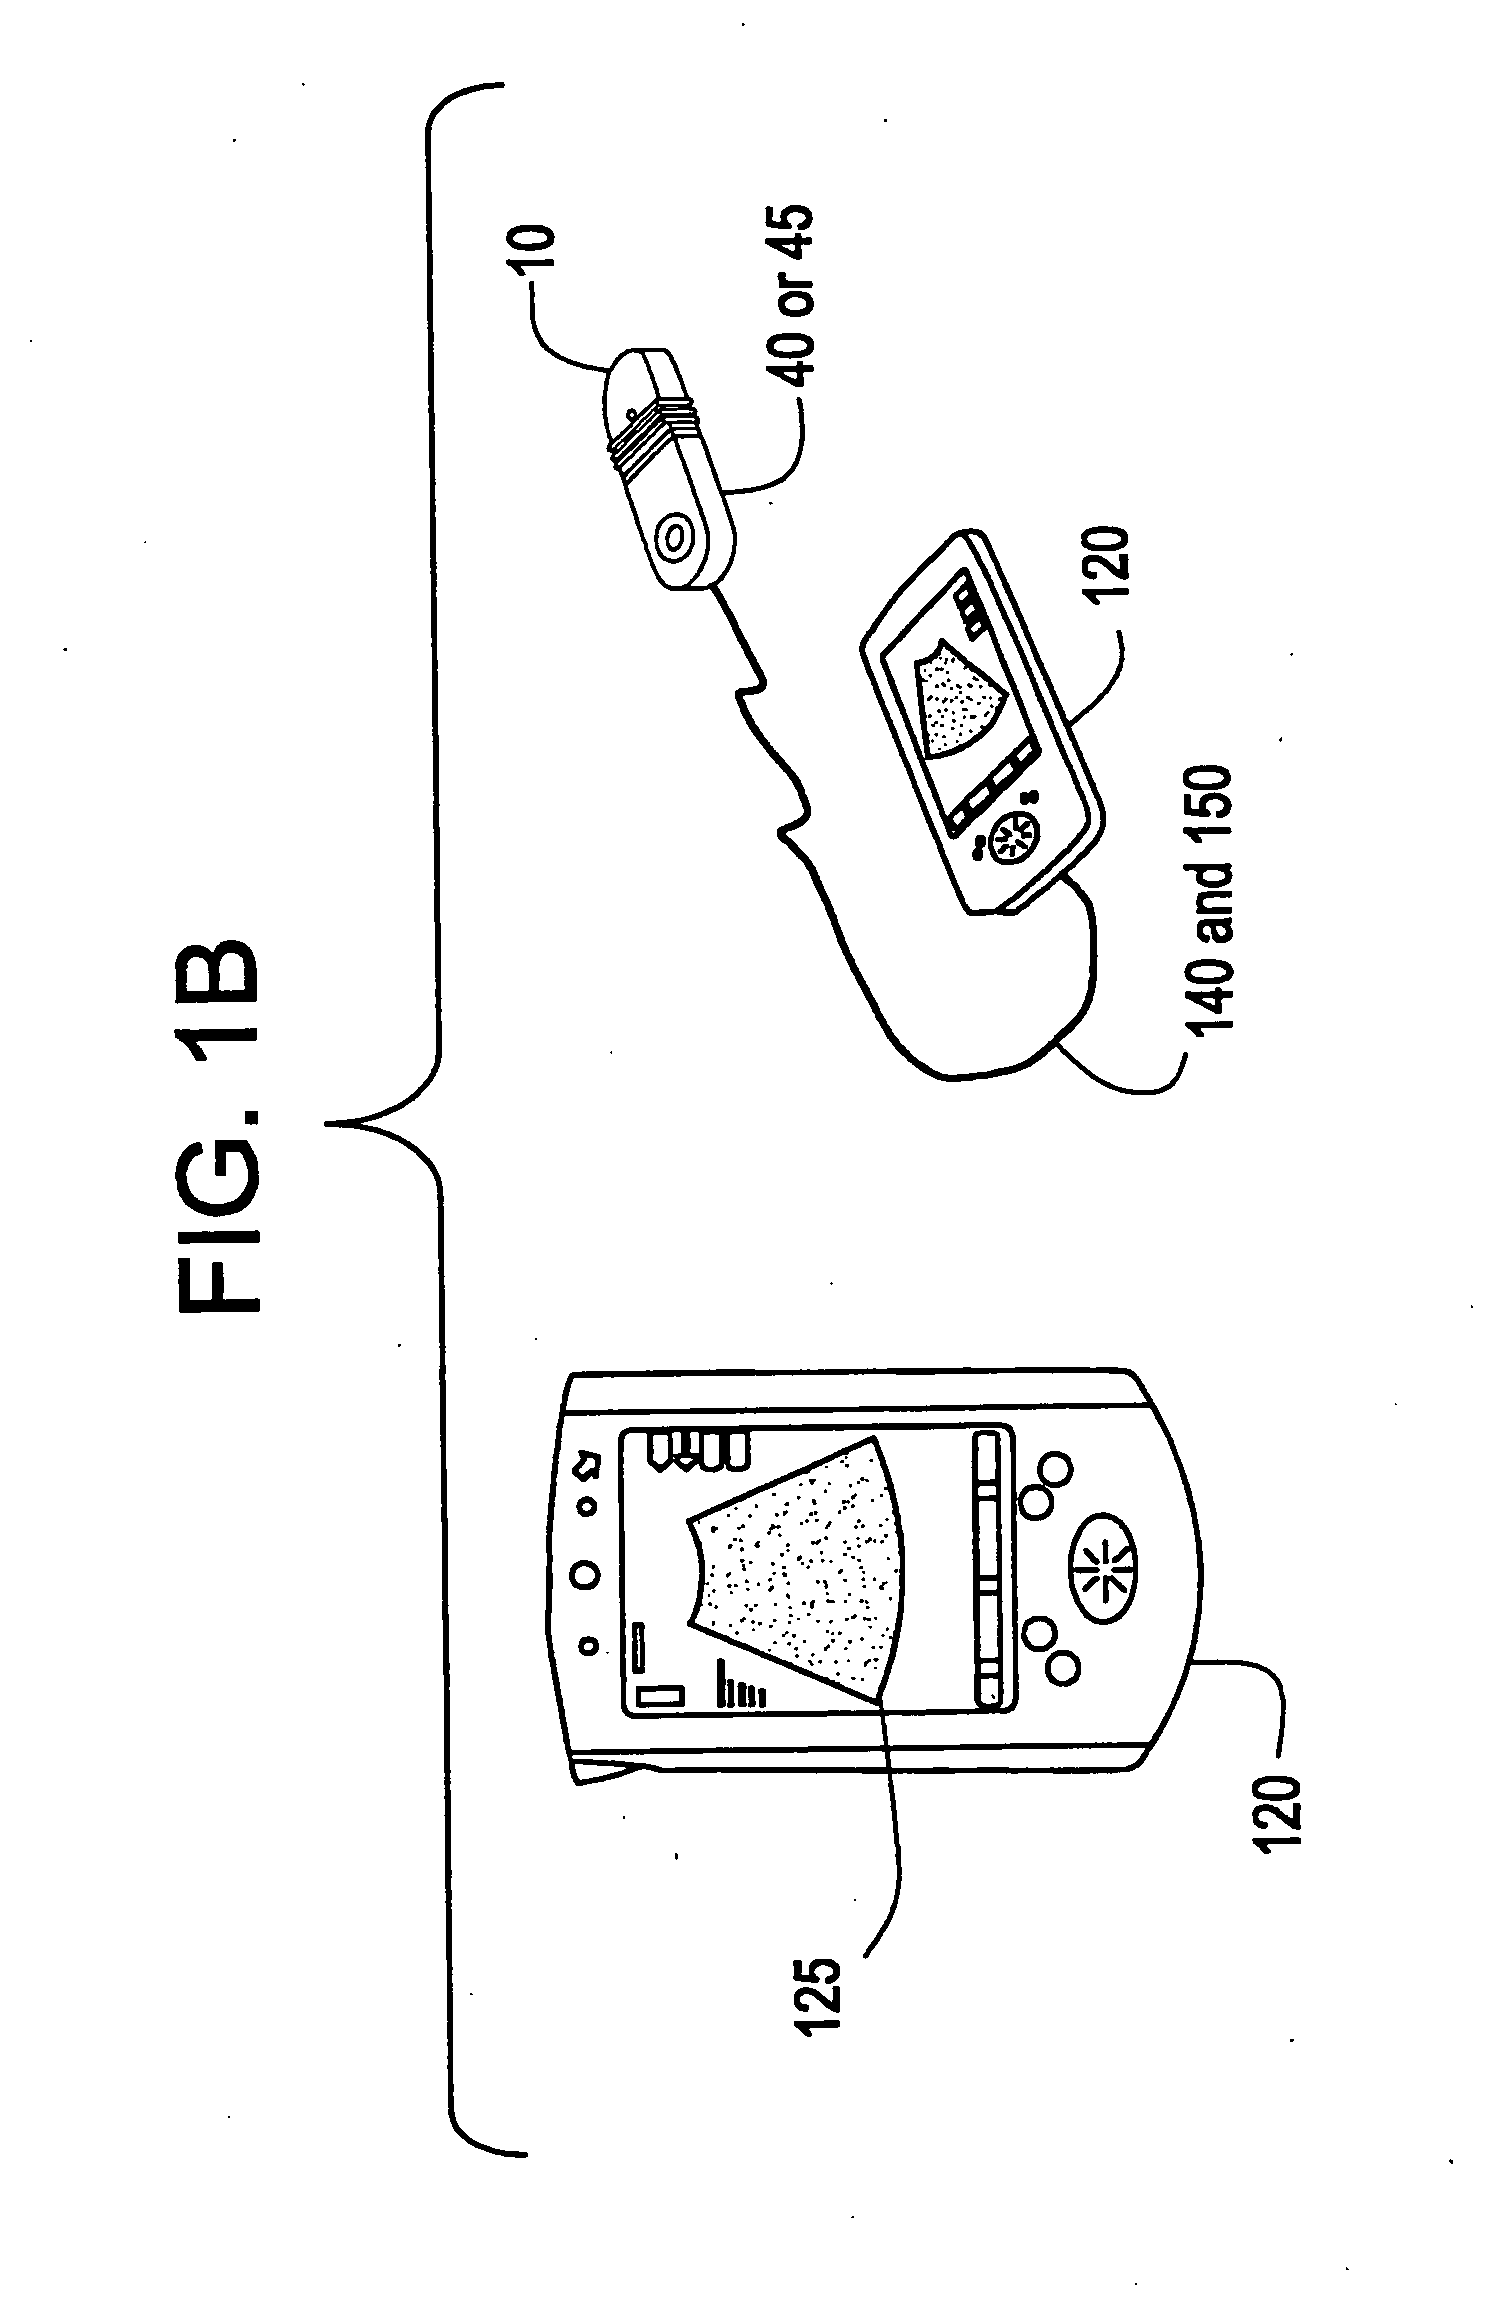 Method and system for PDA-based ultrasound